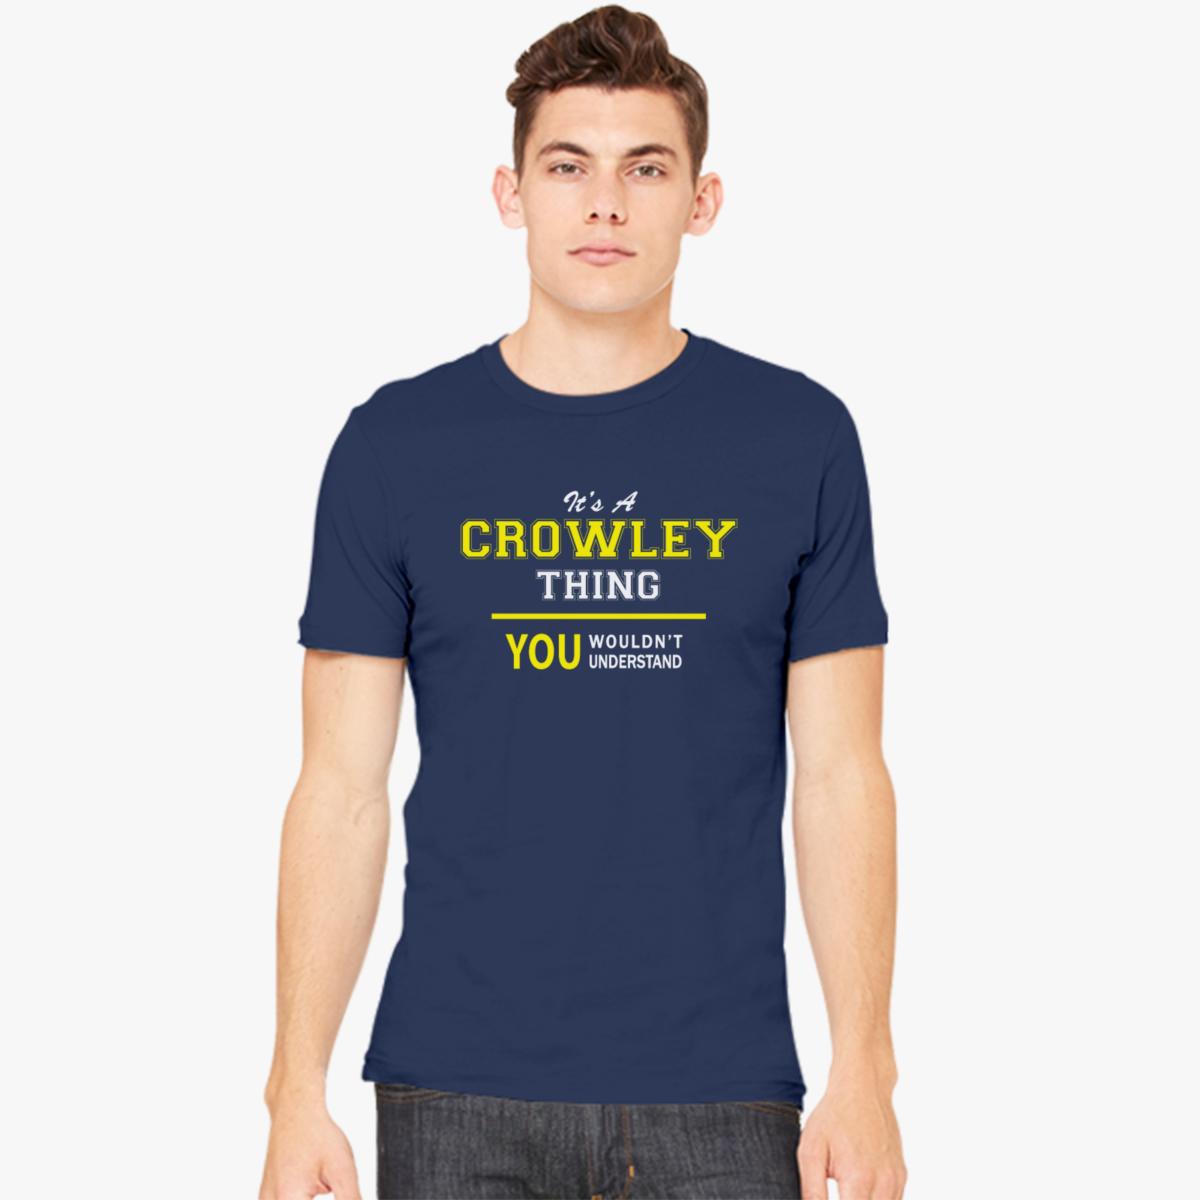 CROWLEY thing you wouldn't understand Men's T-shirt